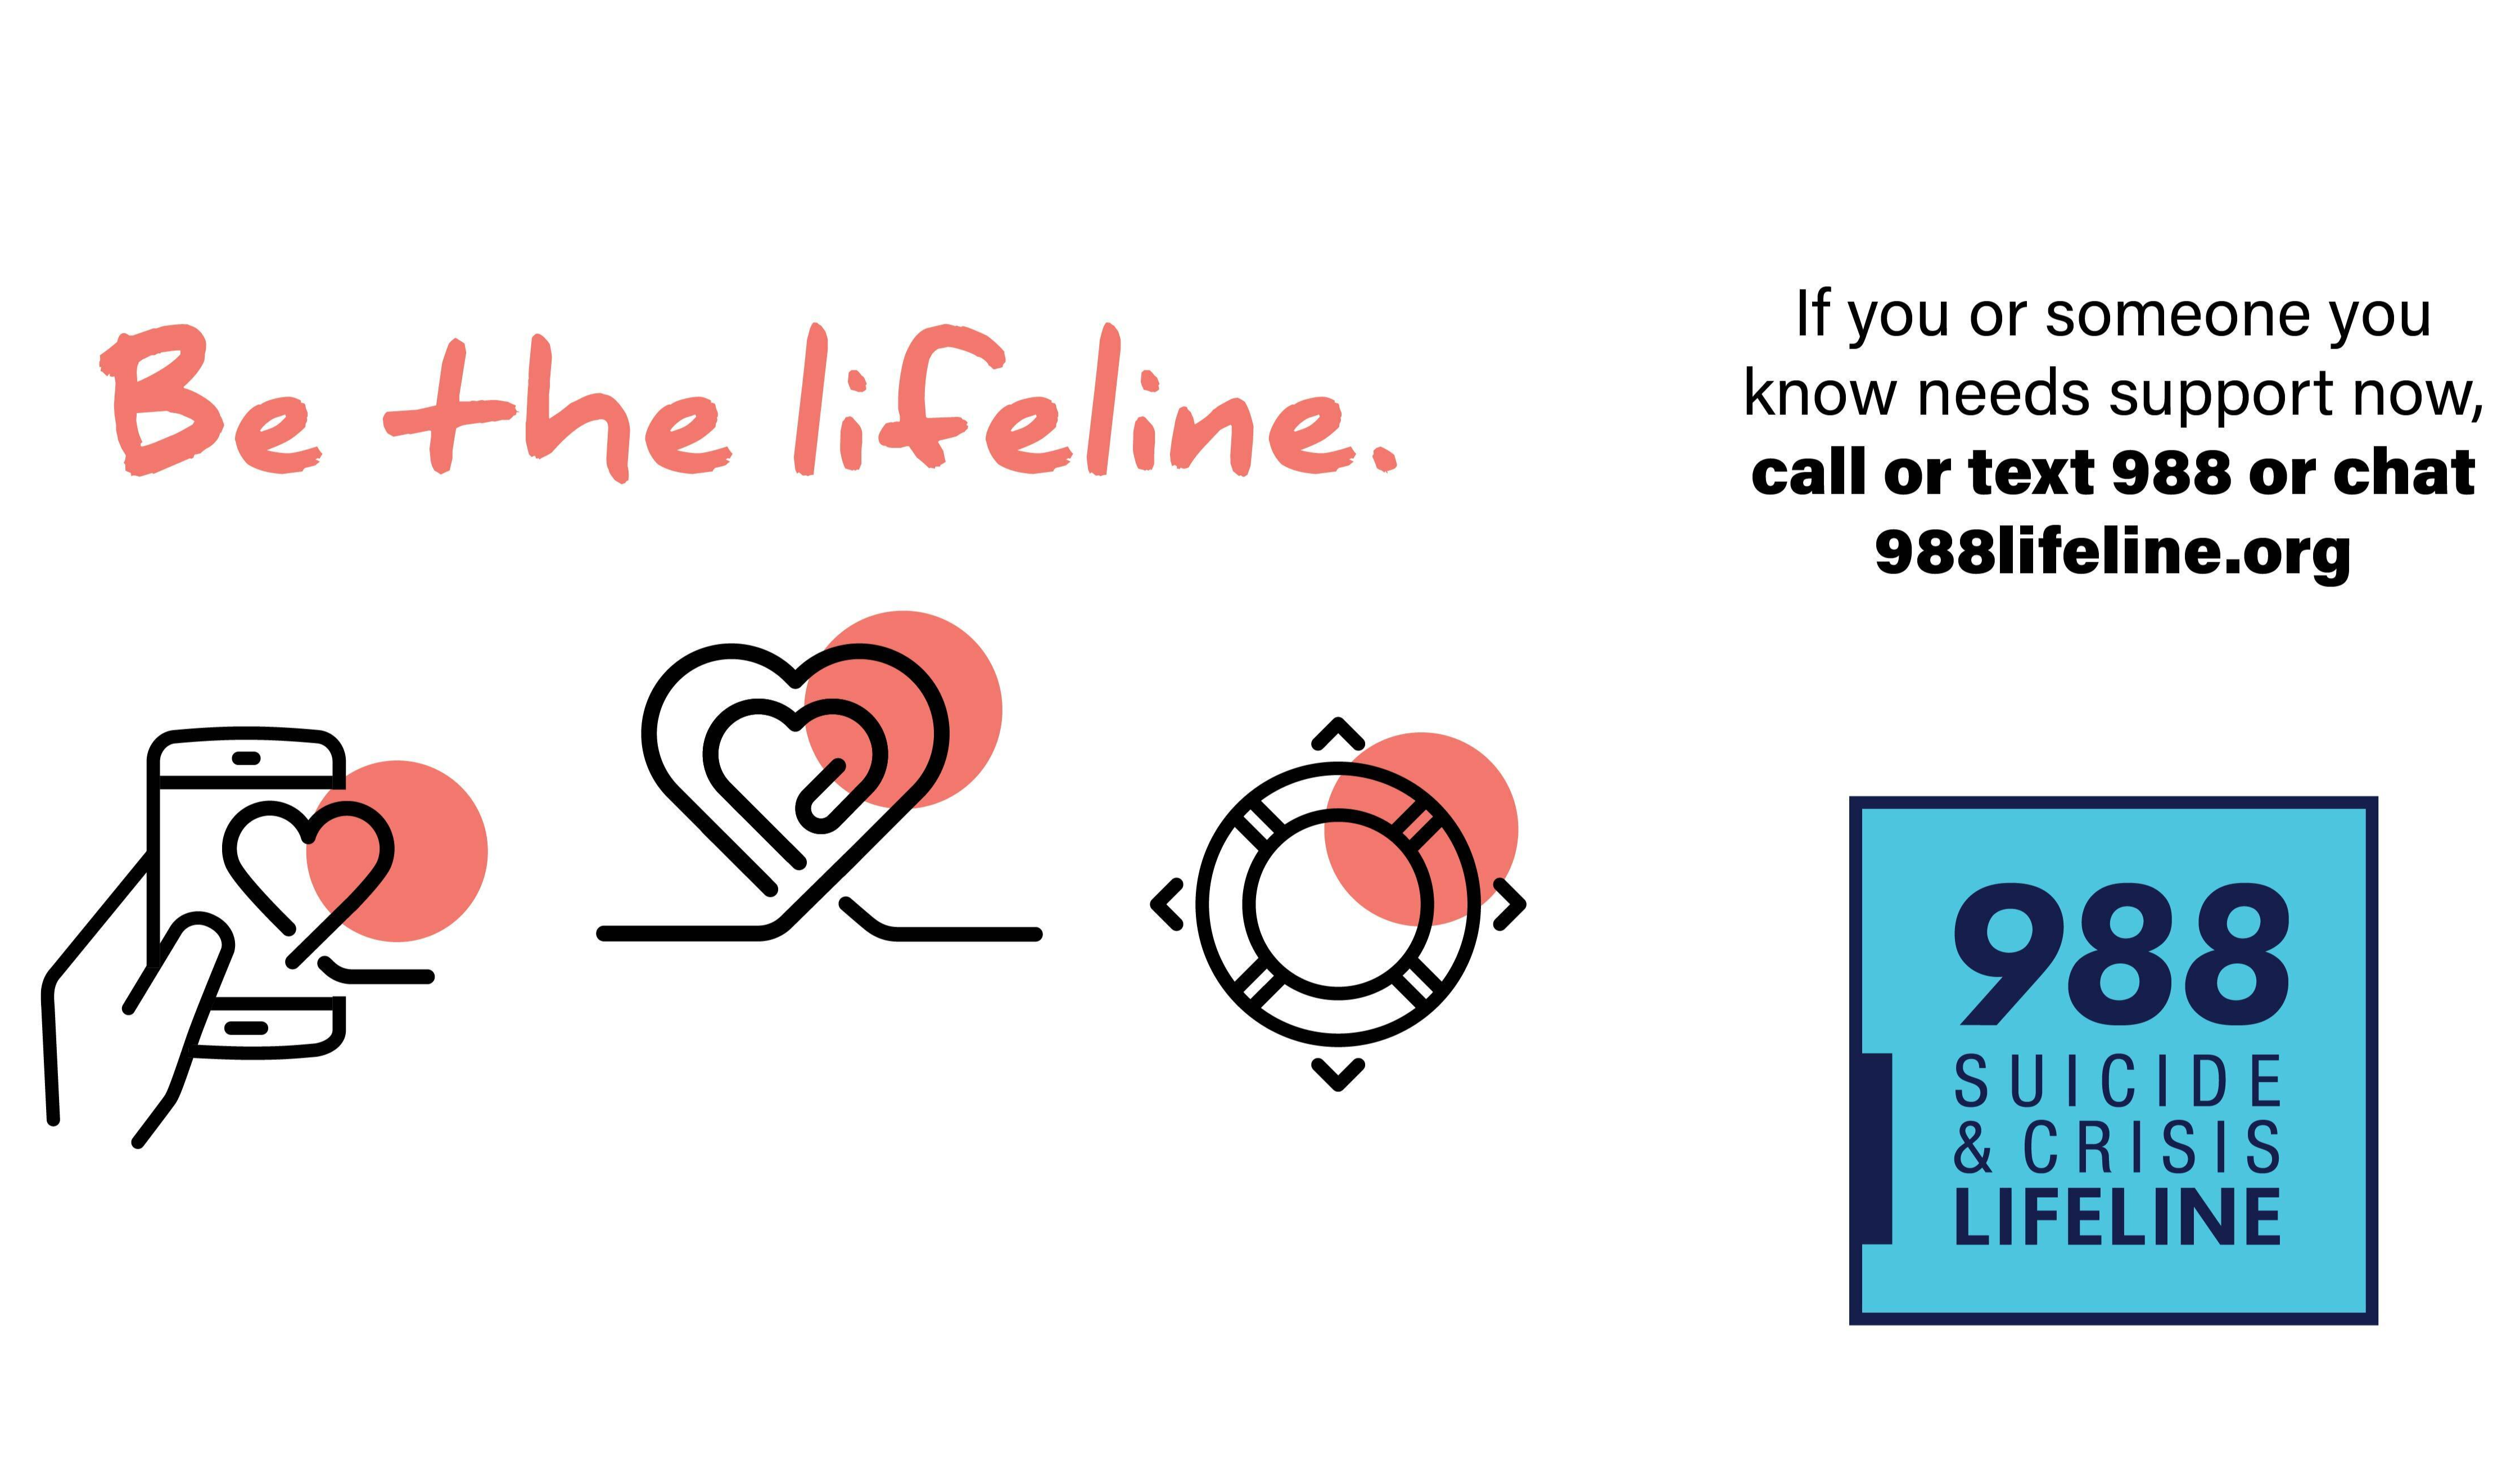 Be the Lifeline with images of smartphone, hearts, life preserver. If you or someone you know needs support now, call or text 988 or chat 988lifeline.org.